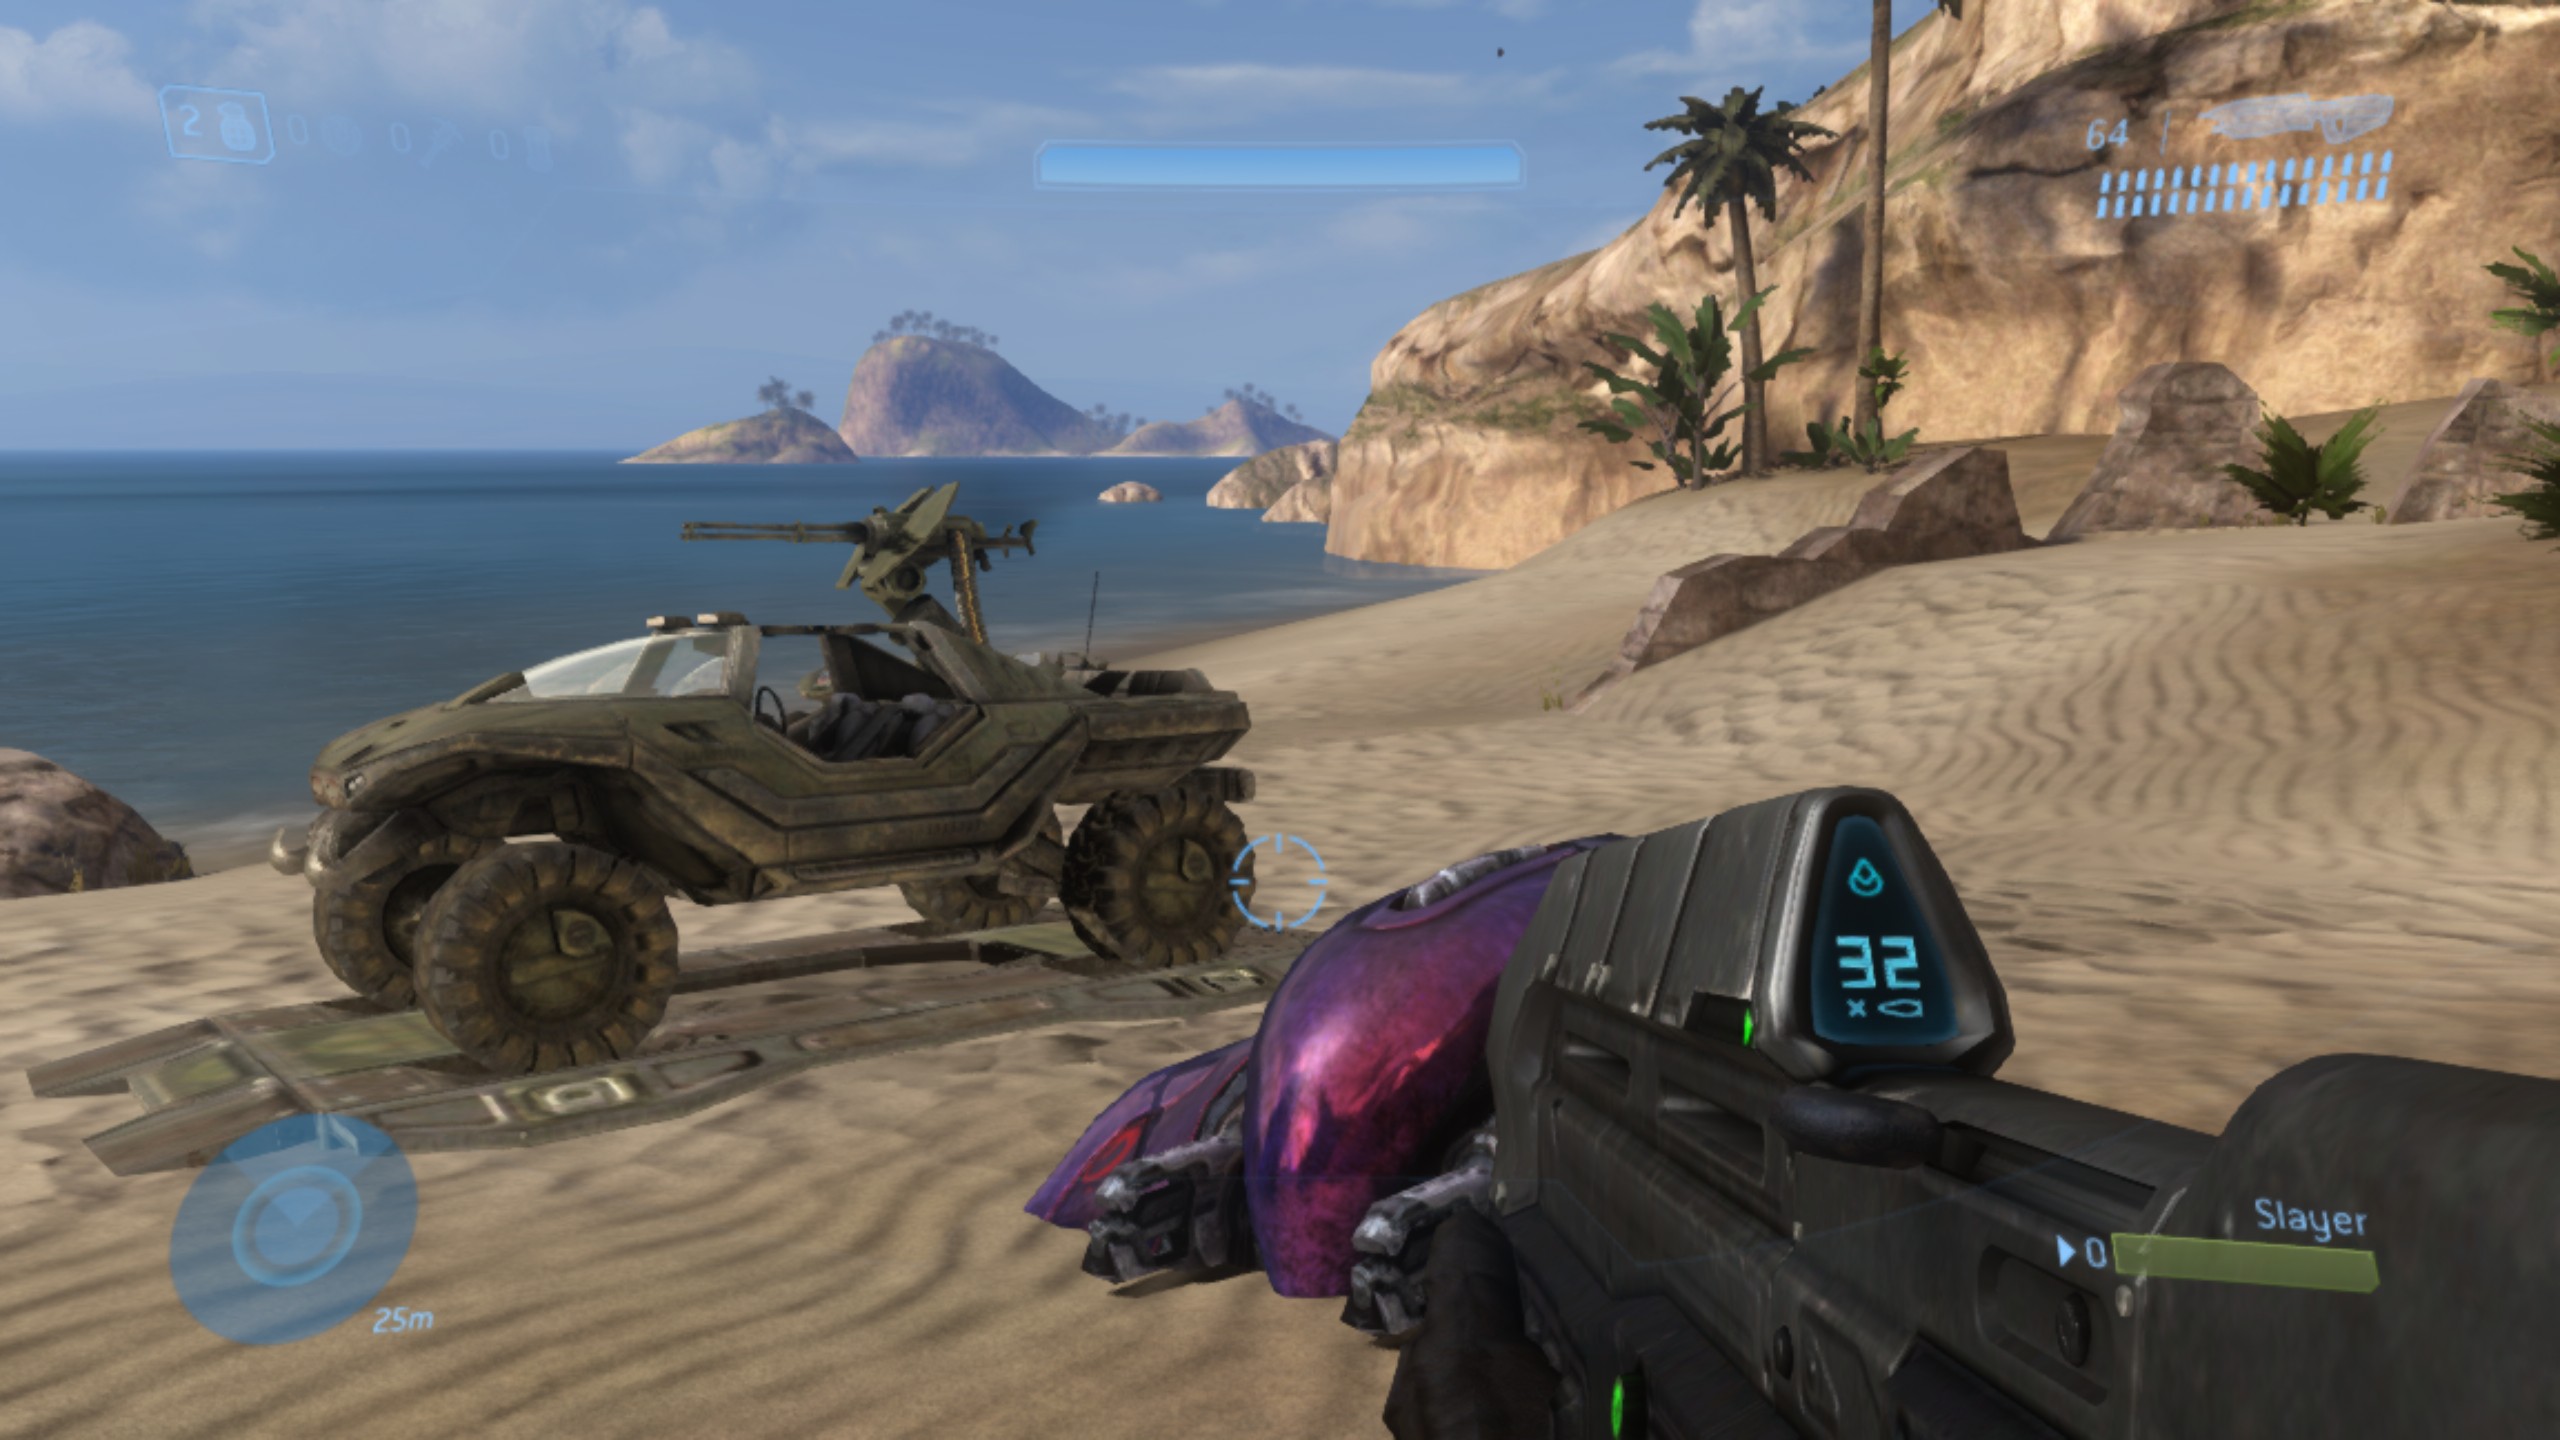 No FSR — Halo 3, no in-game AA, extreme quality FXAA, 1152x640 bilinear-stretched to 2560x1440